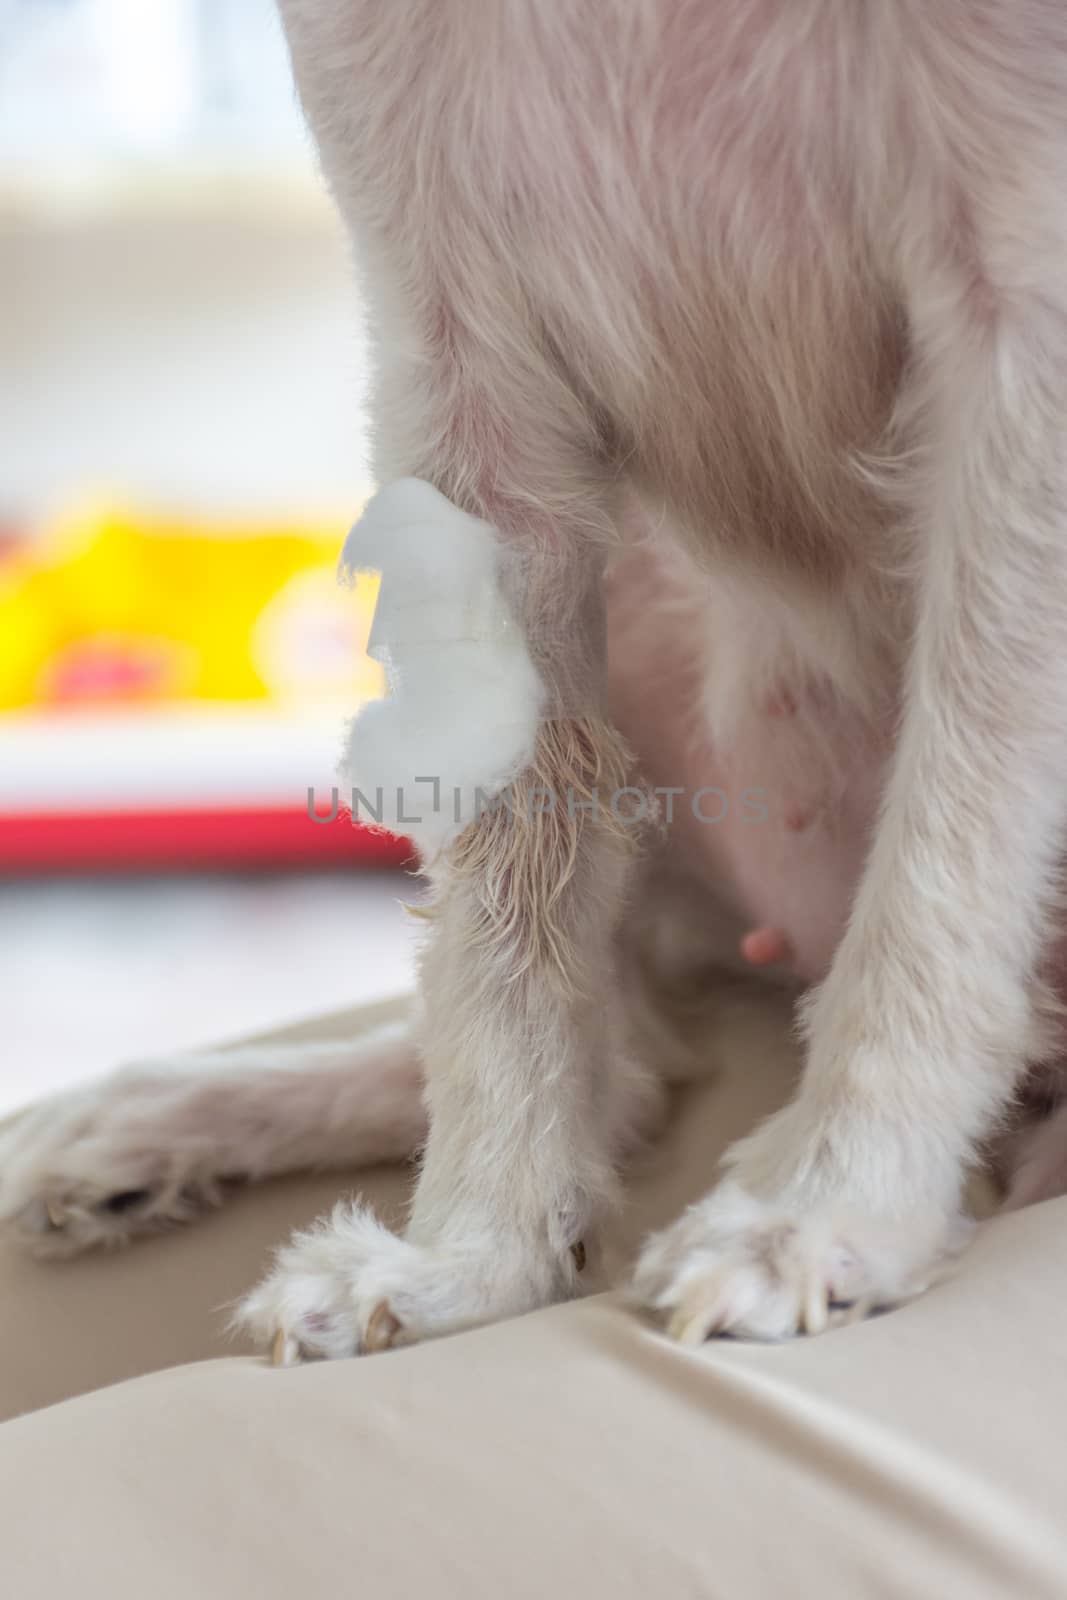 Dog broken leg sore with a bandage making by veterinarian doctor during the examination in veterinary clinic